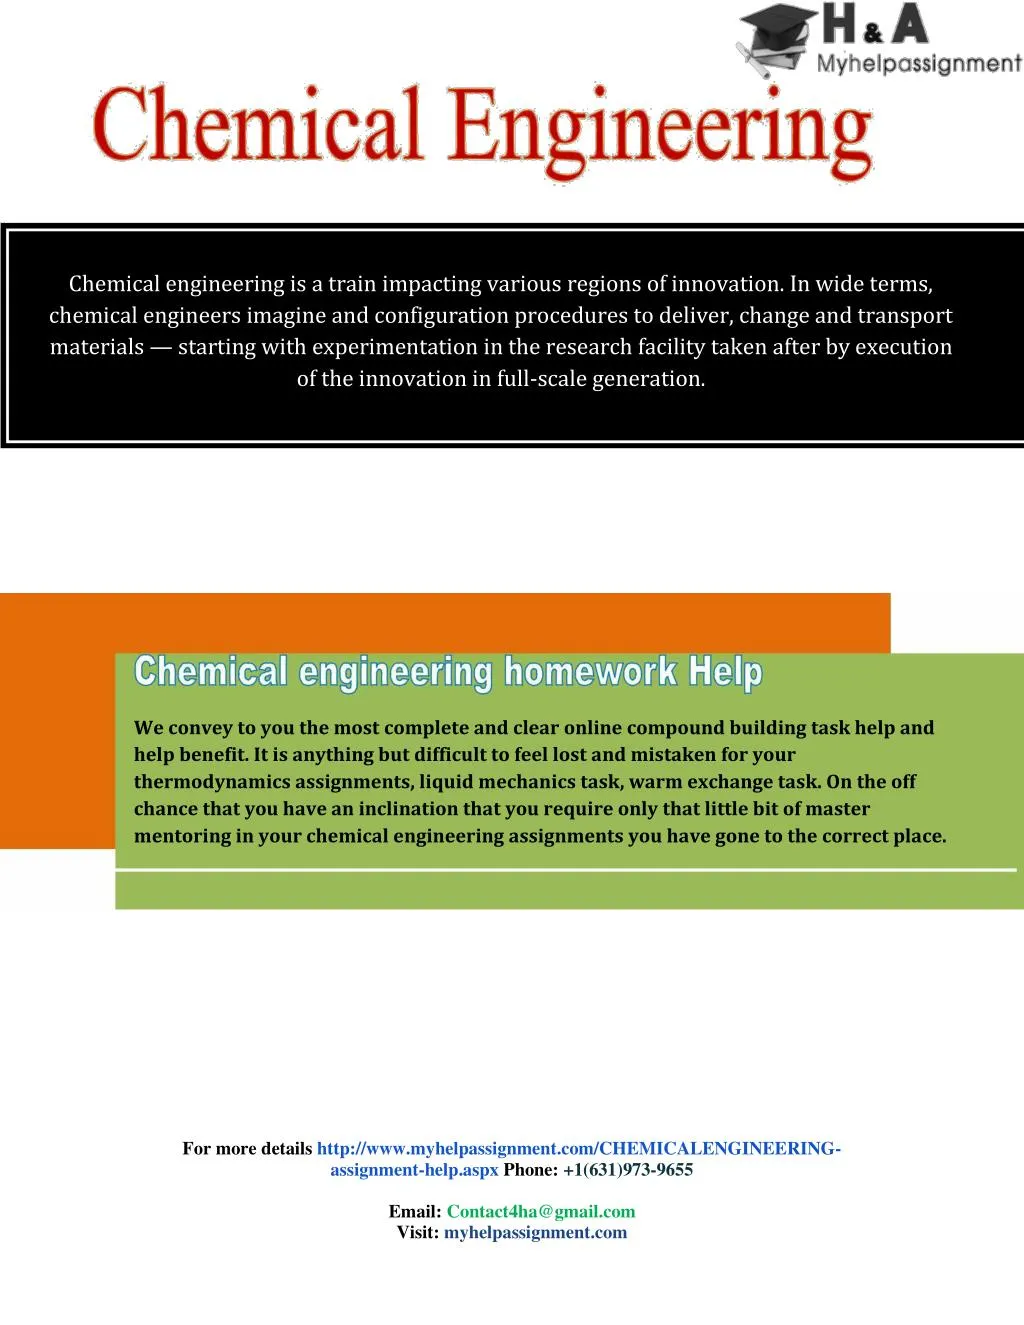 chemical engineering is a train impacting various